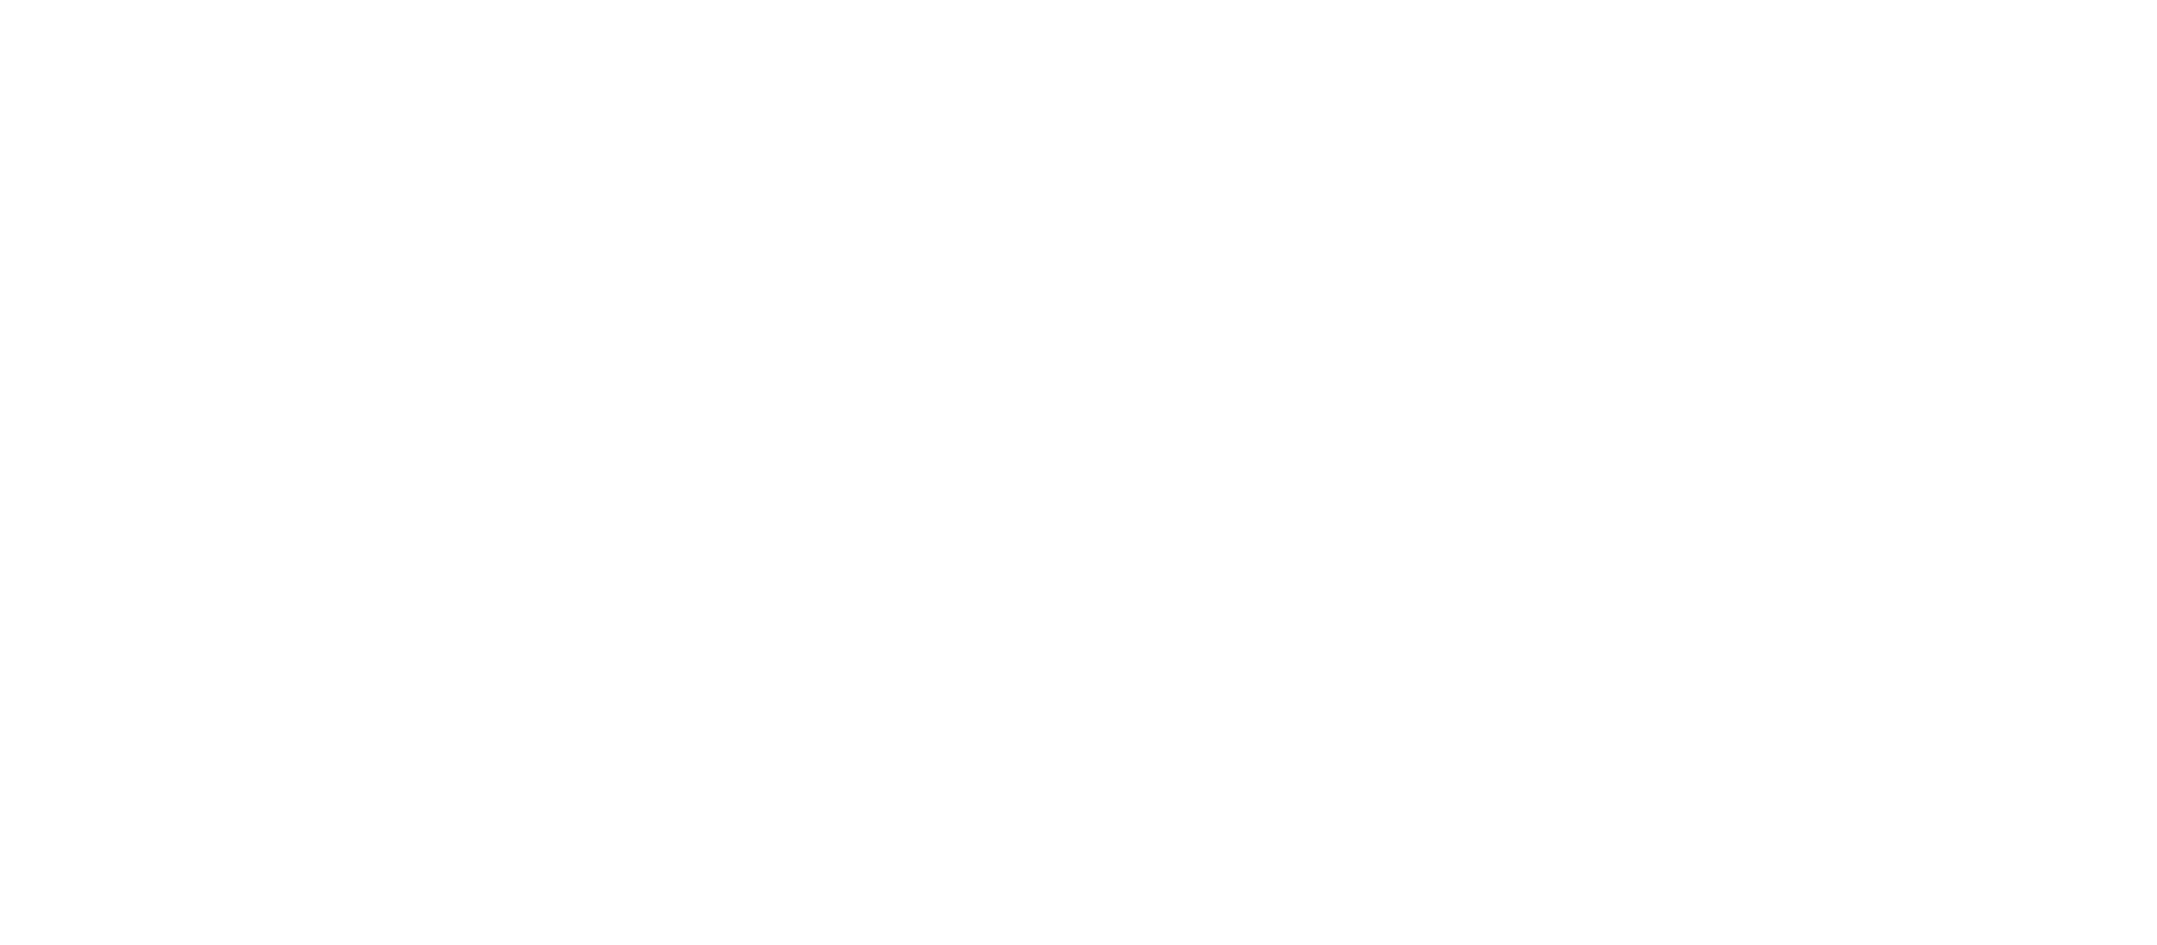 Leverage - Connect intangible assets to your overall business strategy